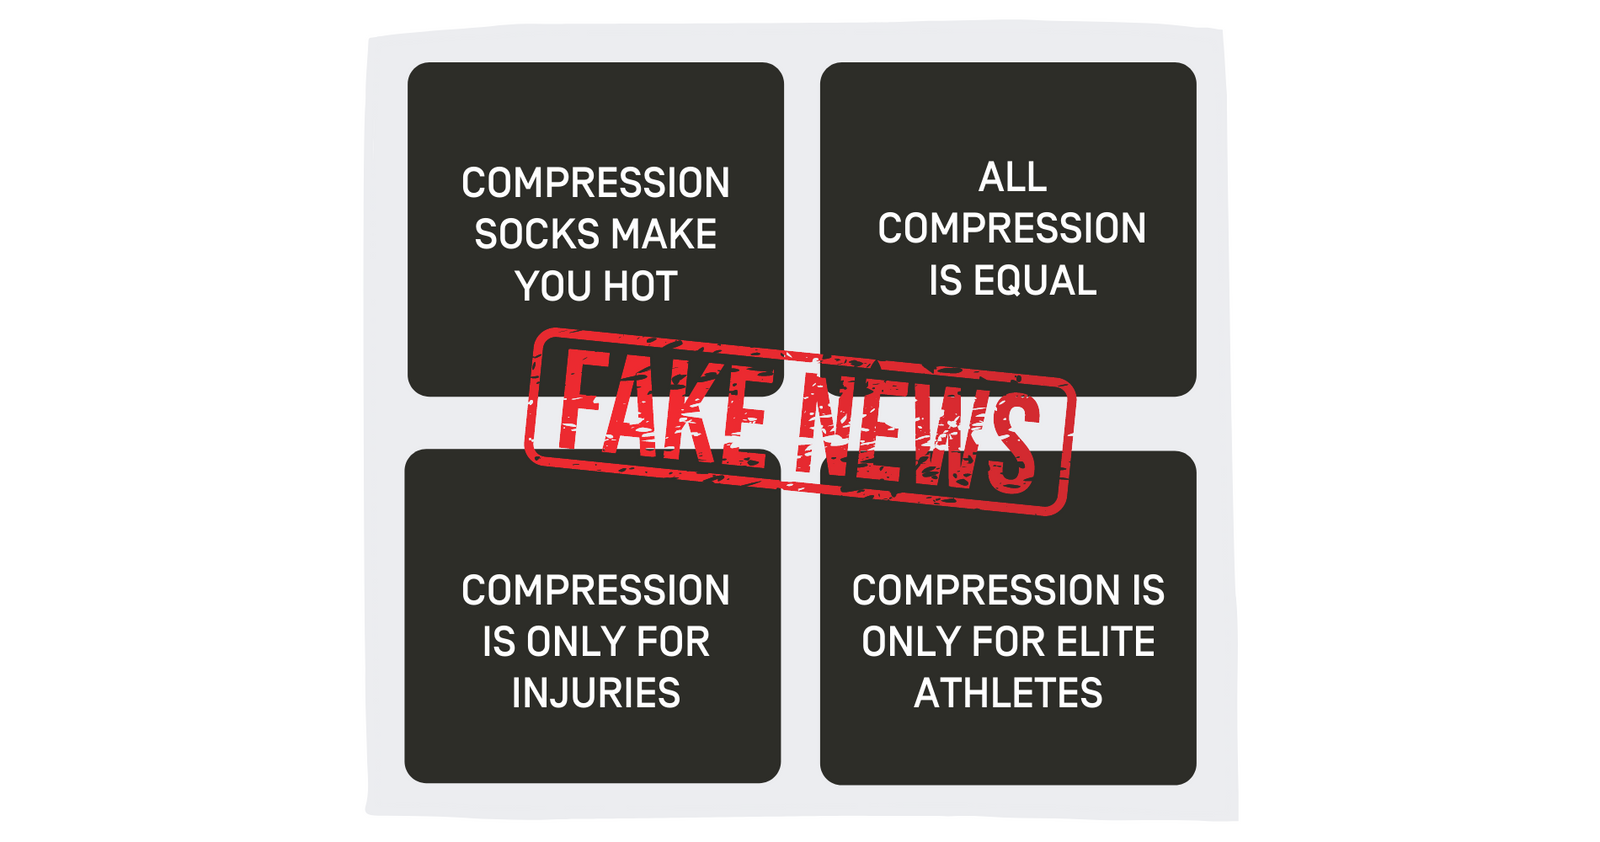 Debunking The Myths About Medical Compression Stockings - March